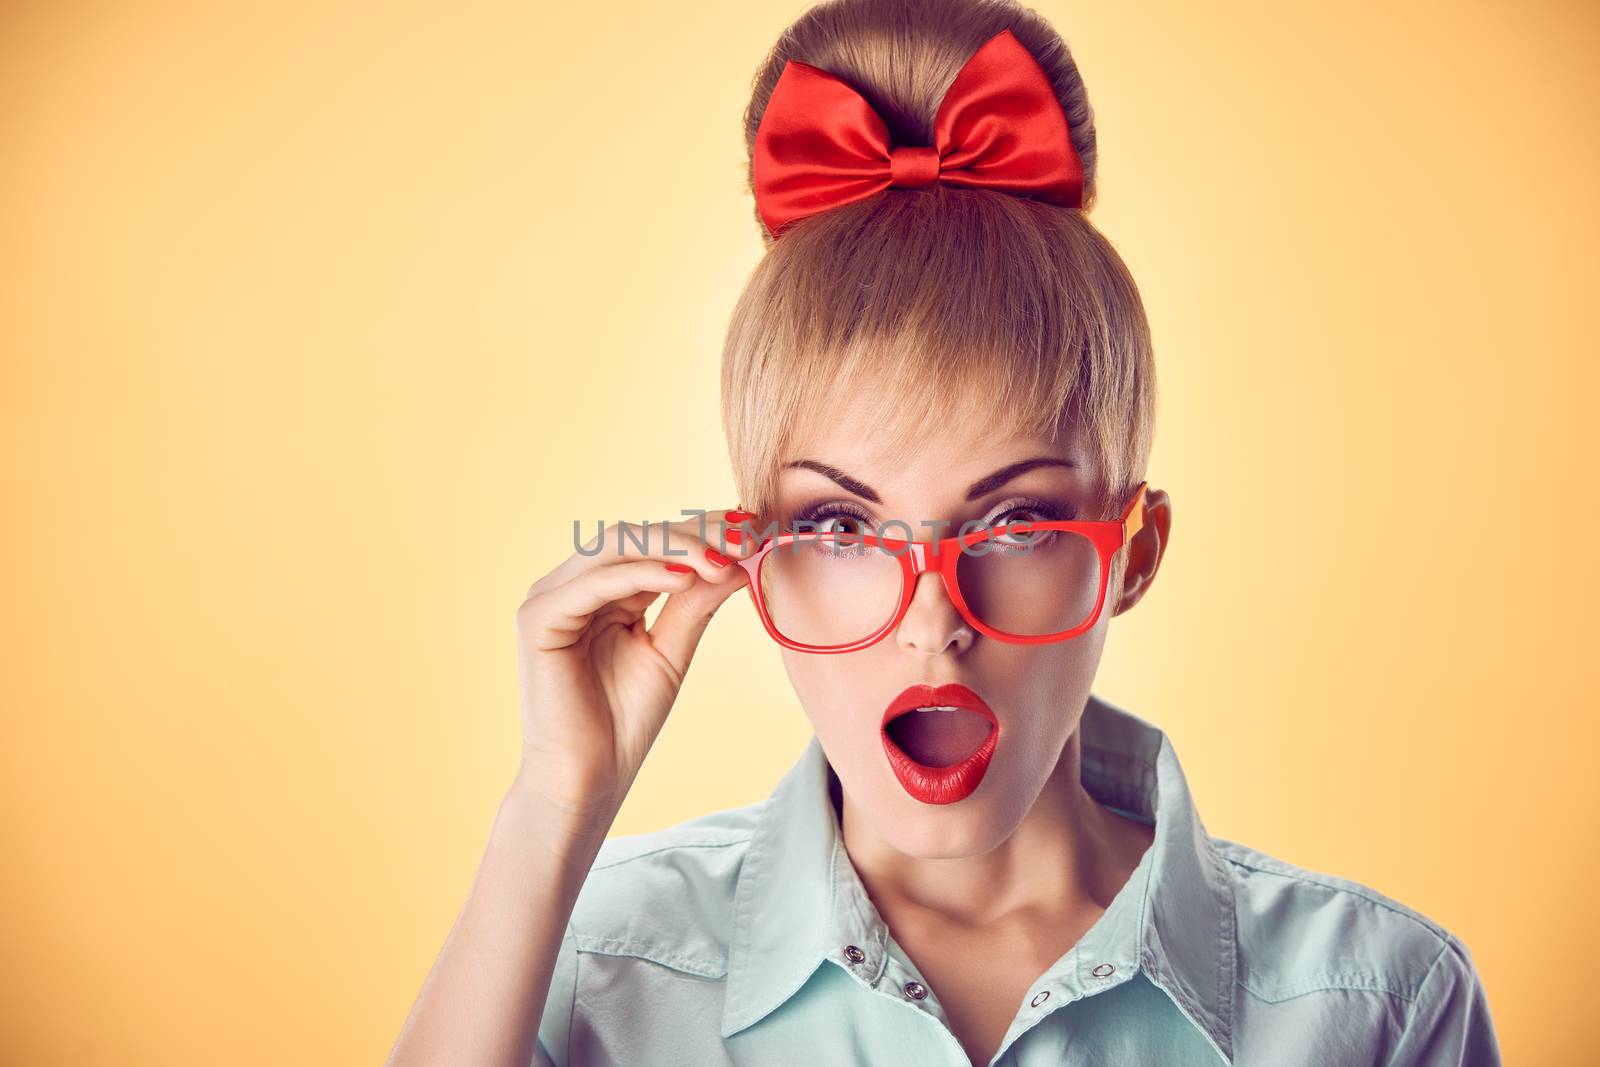 Beauty fashion portrait business woman, stylish red glasses surprised, open mouth, shocked. Attractive blonde girl,  confidence, Pinup hairstyle bow makeup.Unusual playful, emotions.Vintage, on yellow